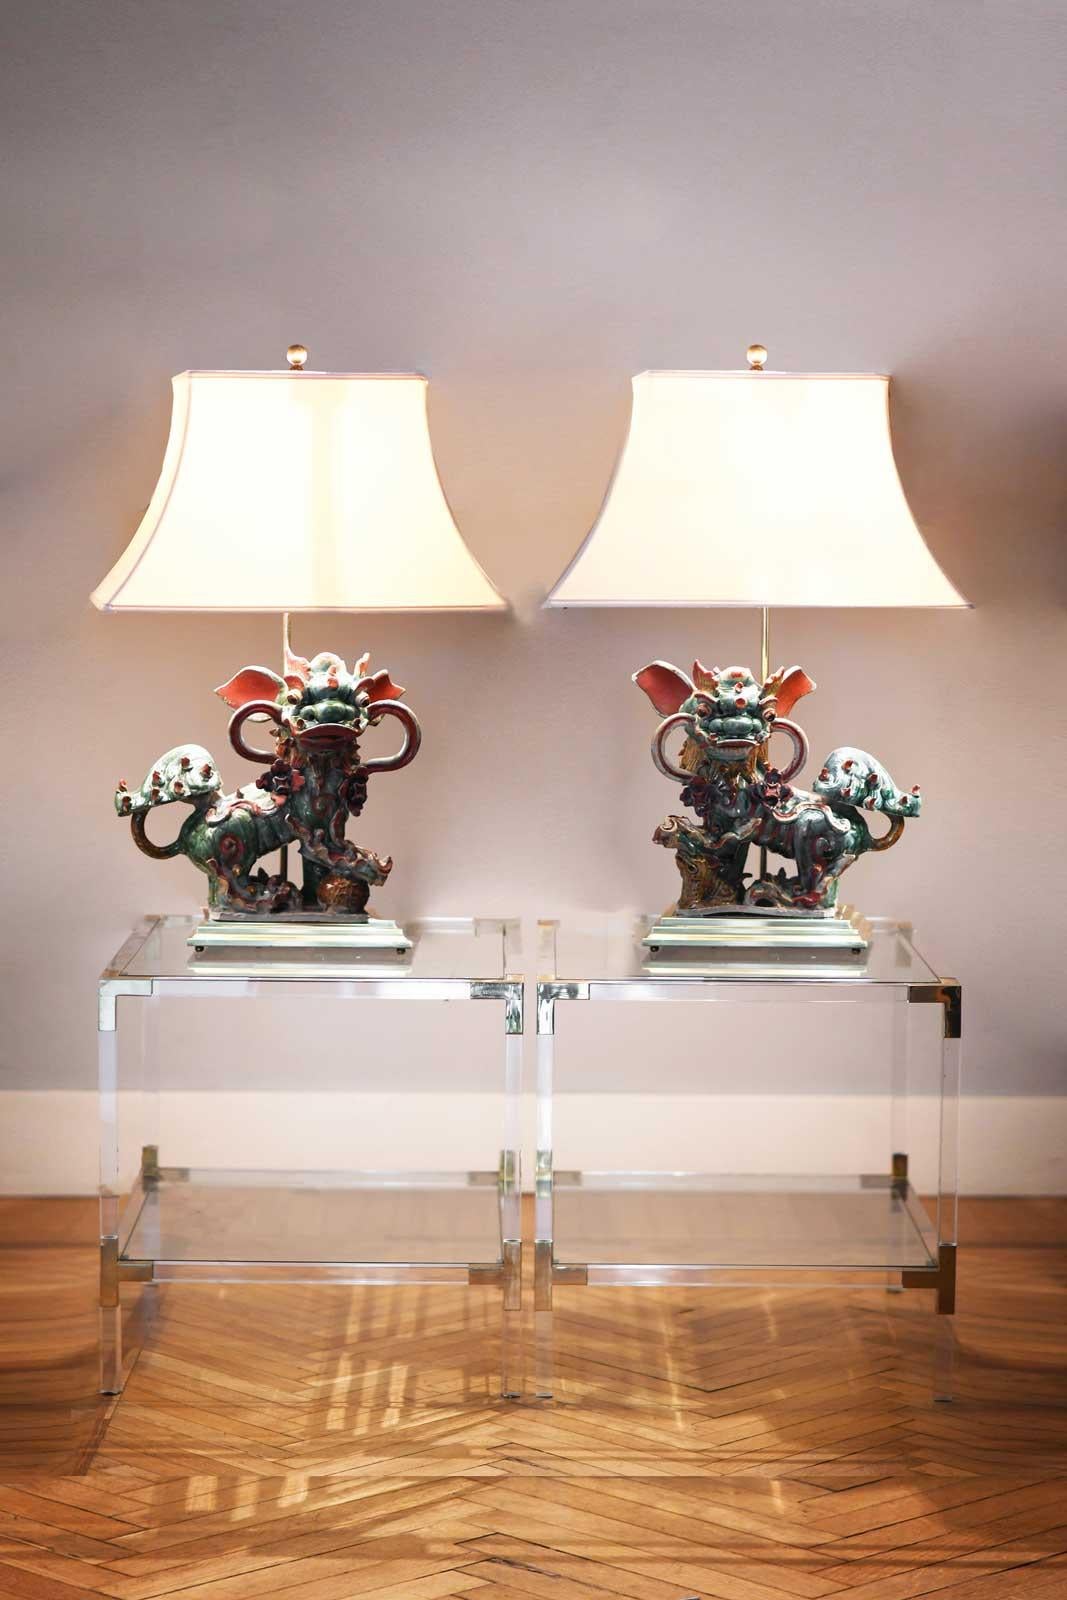 Pair of Chinese Glazed Stoneware Buddhist Lions Lamp on a brass base come from Villa Giuseppina, one of the most representative residences on Lake Como. Built in the third decade of the 20th century for the English Garwood family. In the 90s with